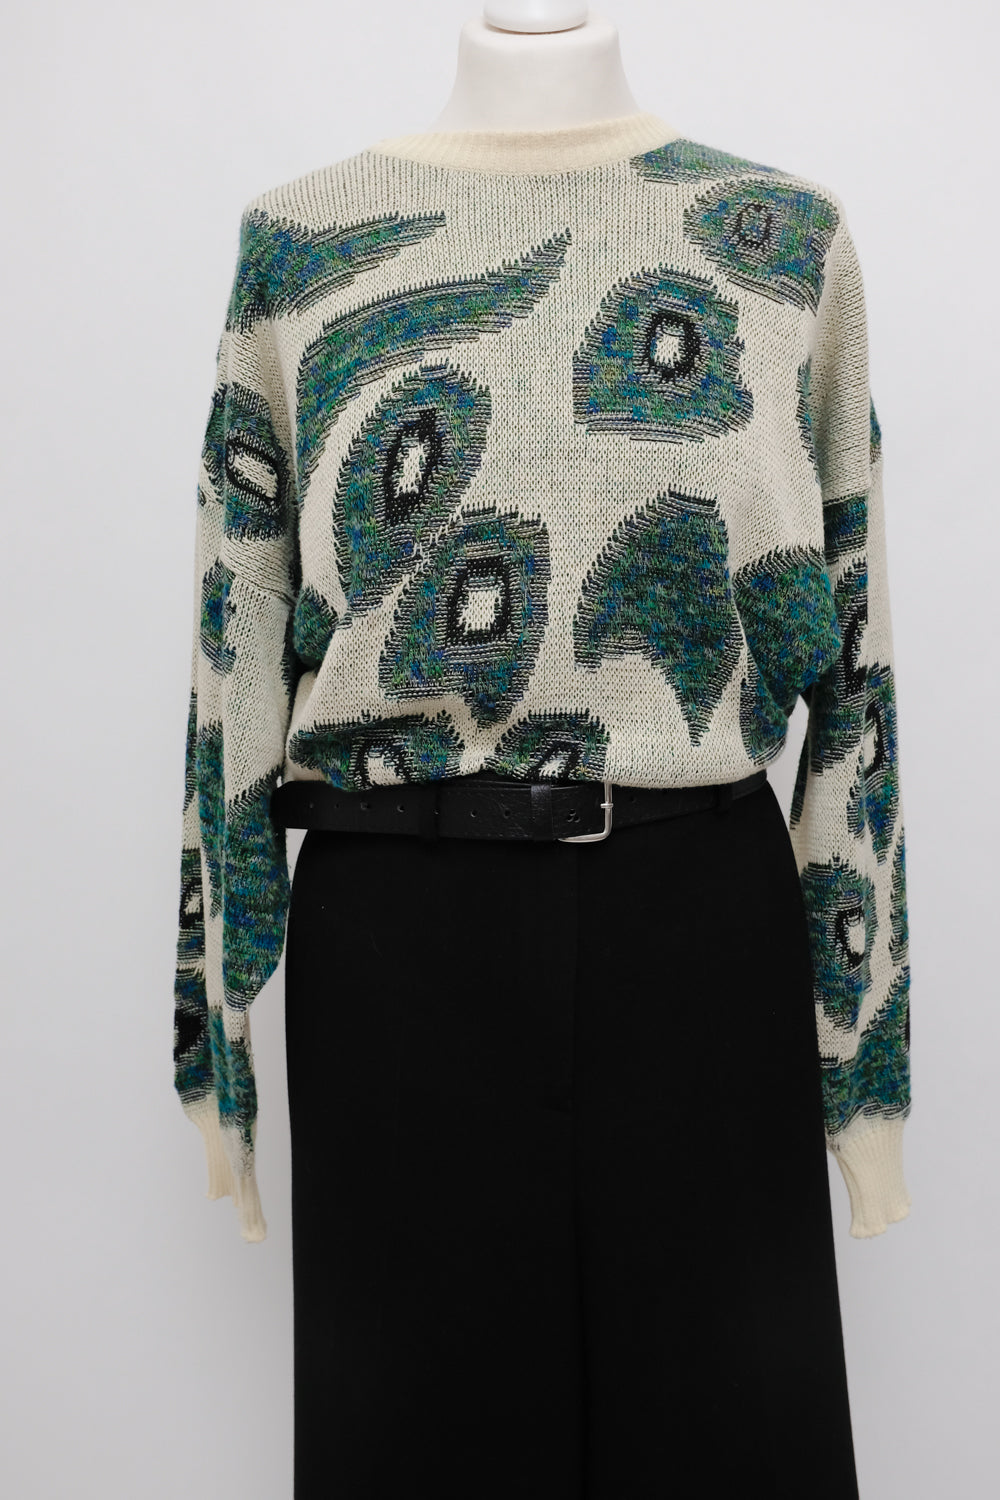 PEACOCK VINTAGE KNIT OVER SWEATER